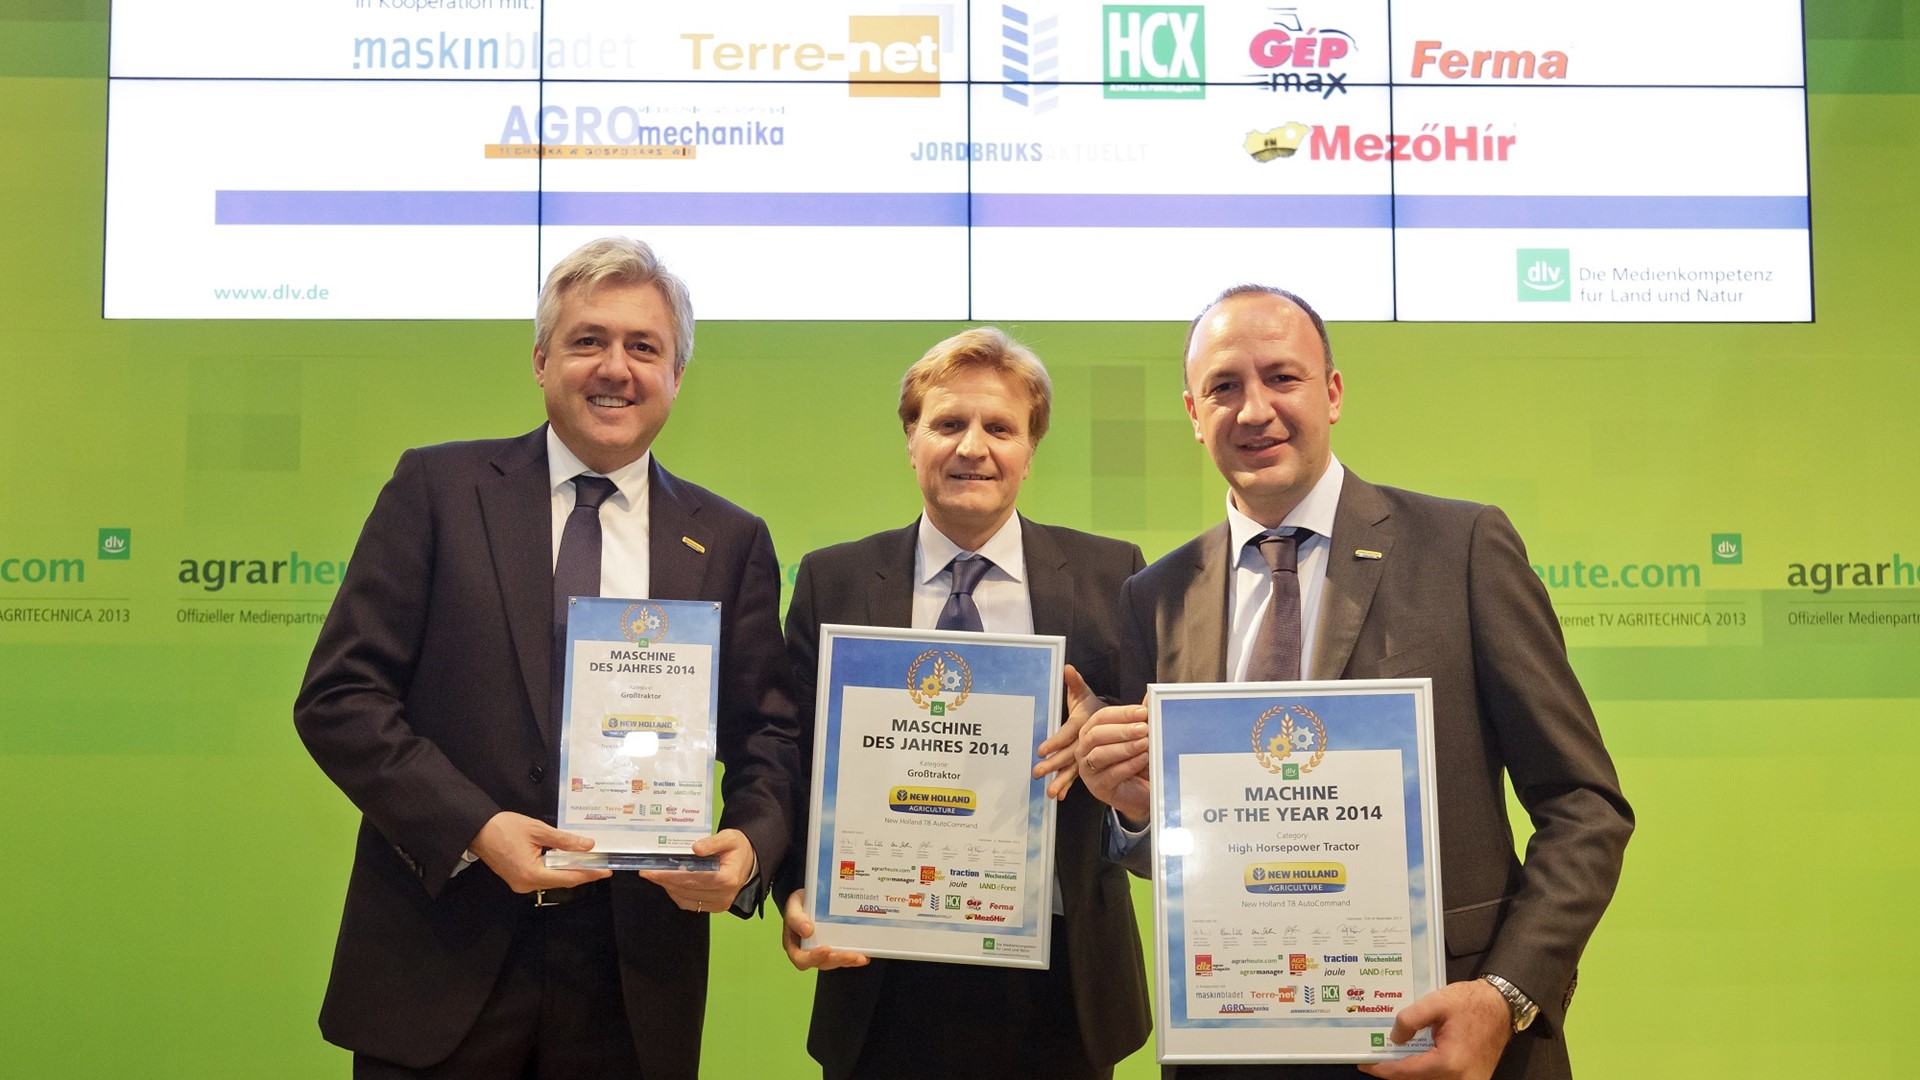 Carlo Lambro, Brand President New Holland Agriculture receives the "Machine of the Year 2014" award for T8.420 tractor